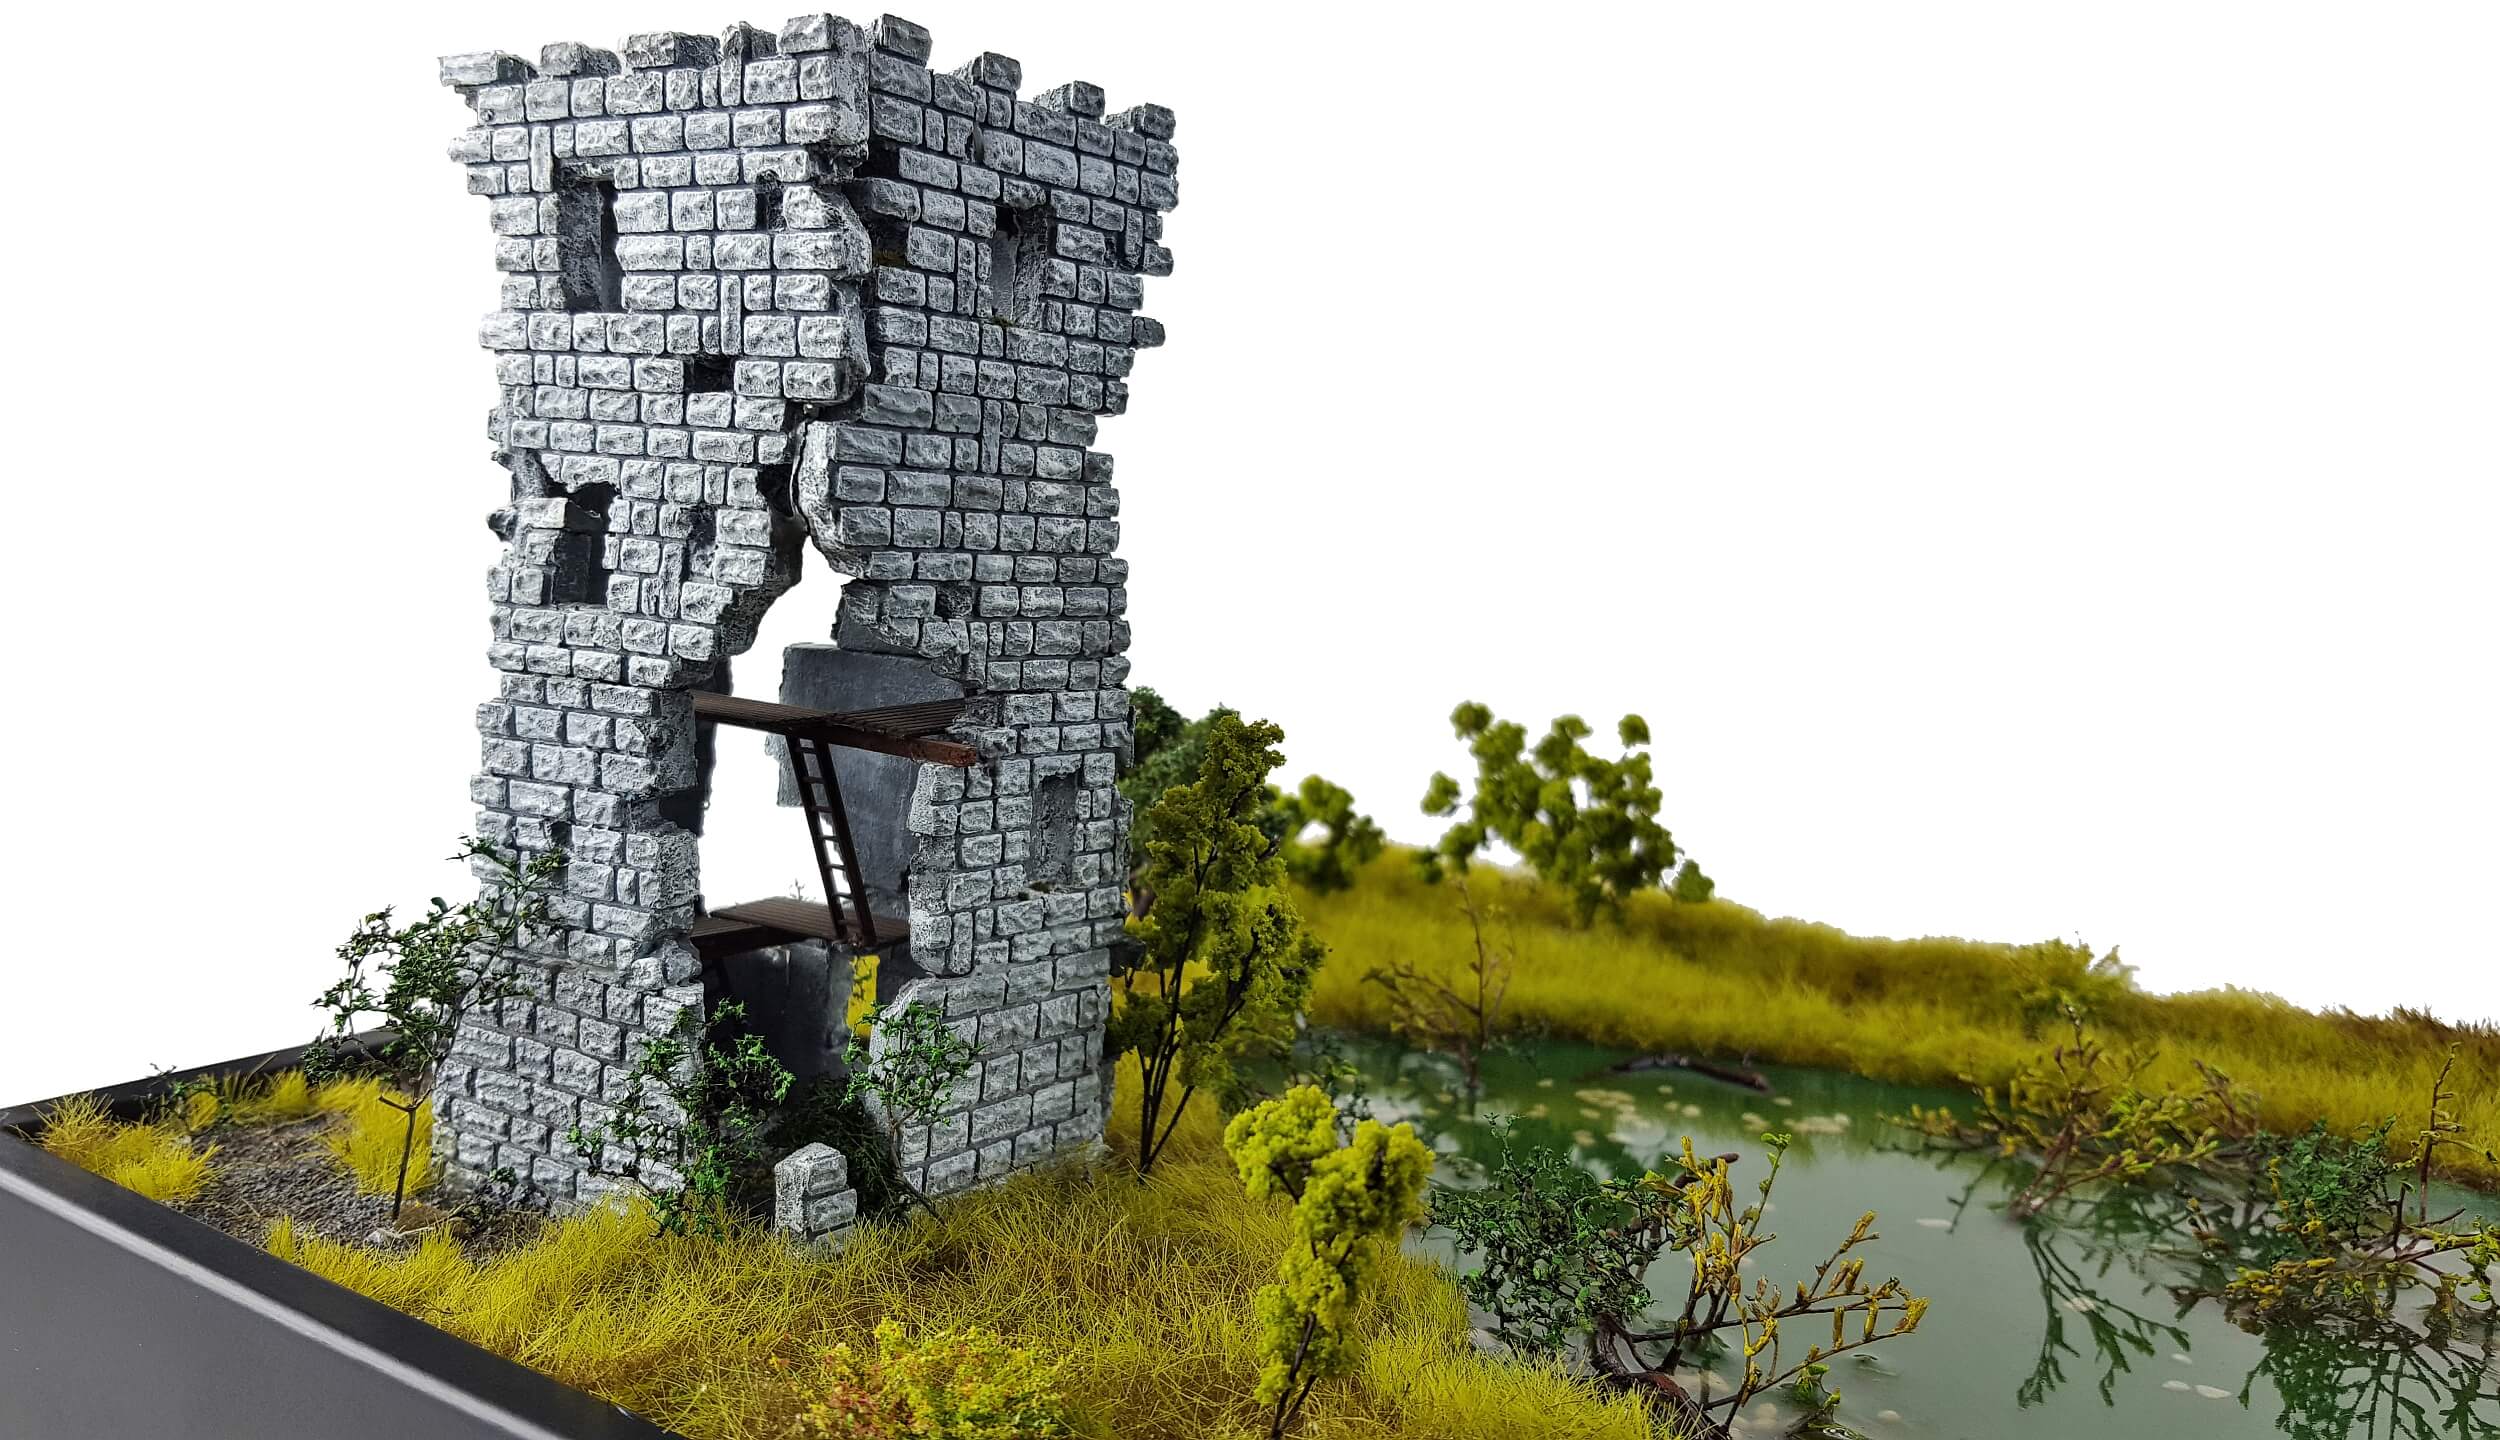 Ruined old tower diorama